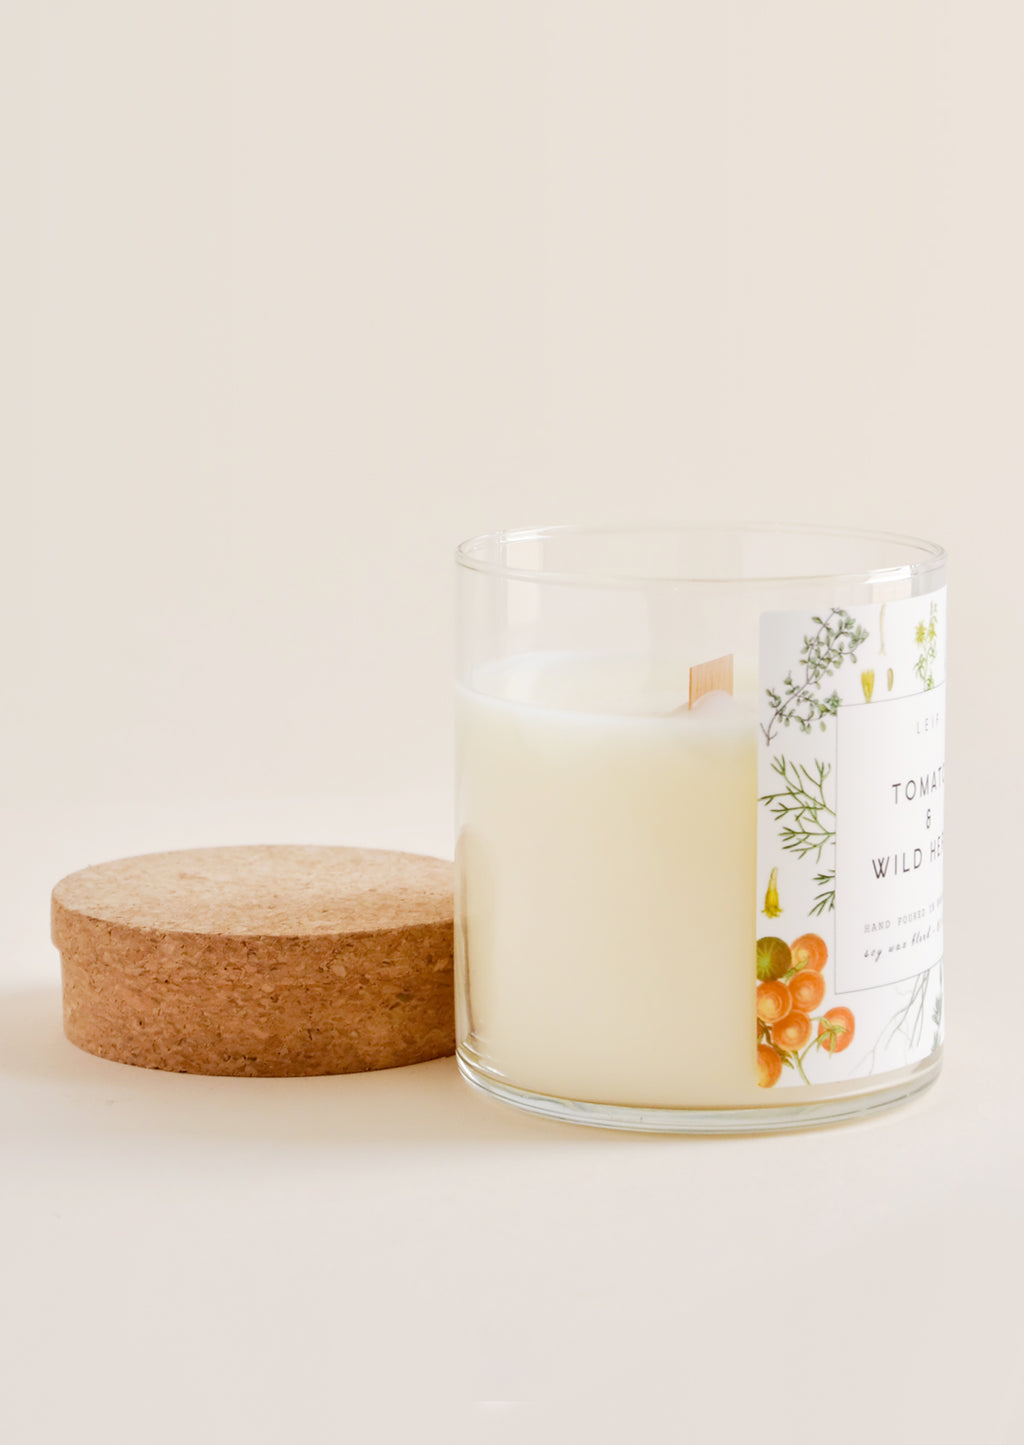 3: A glass candle with botanical label and wooden wick sits next to its cork lid.